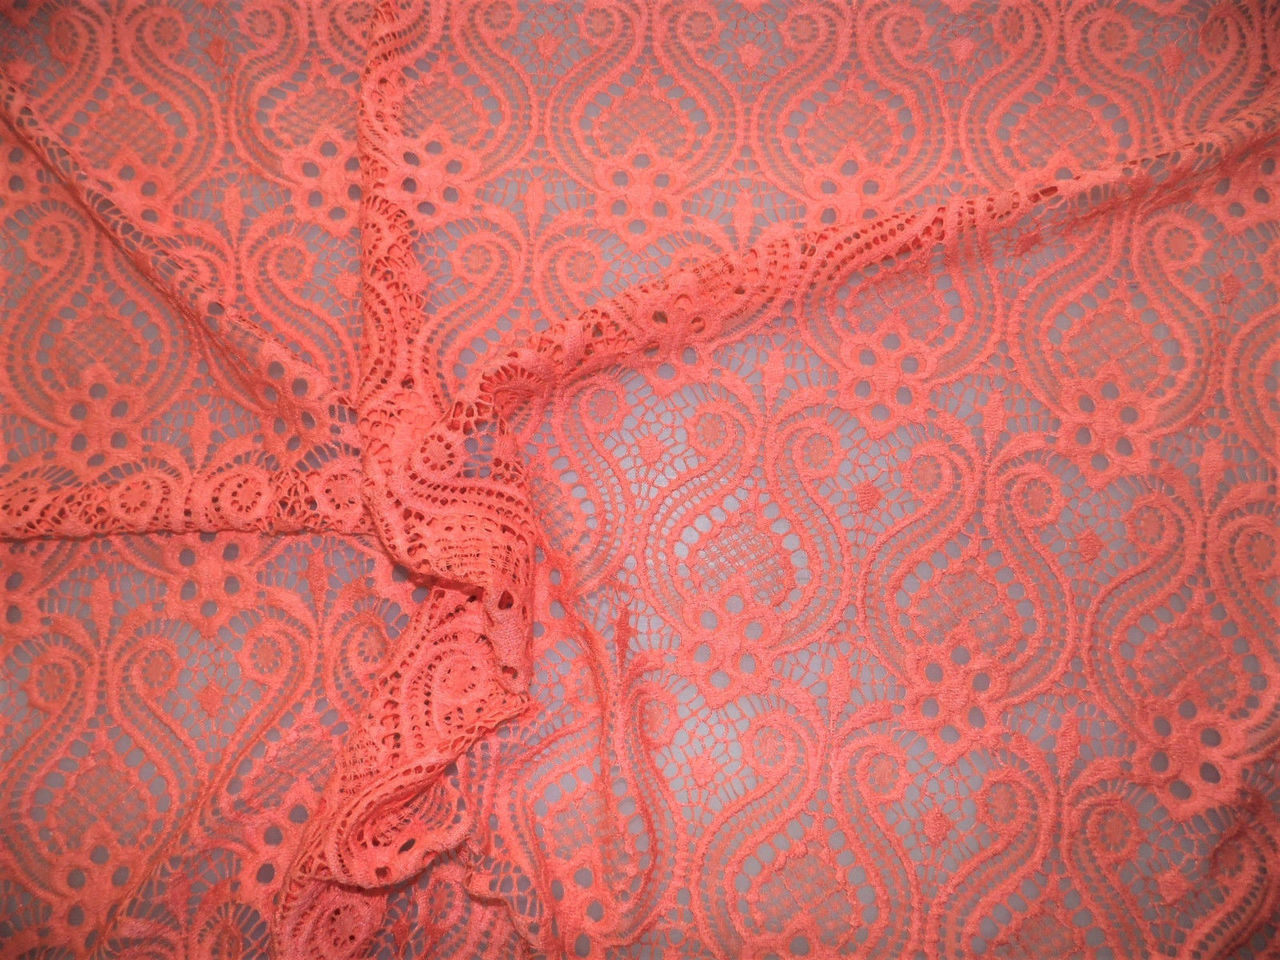 Discount Fabric Stretch Mesh Lace Coral Pink Embroidered Fleuron Bulb Sheer B700